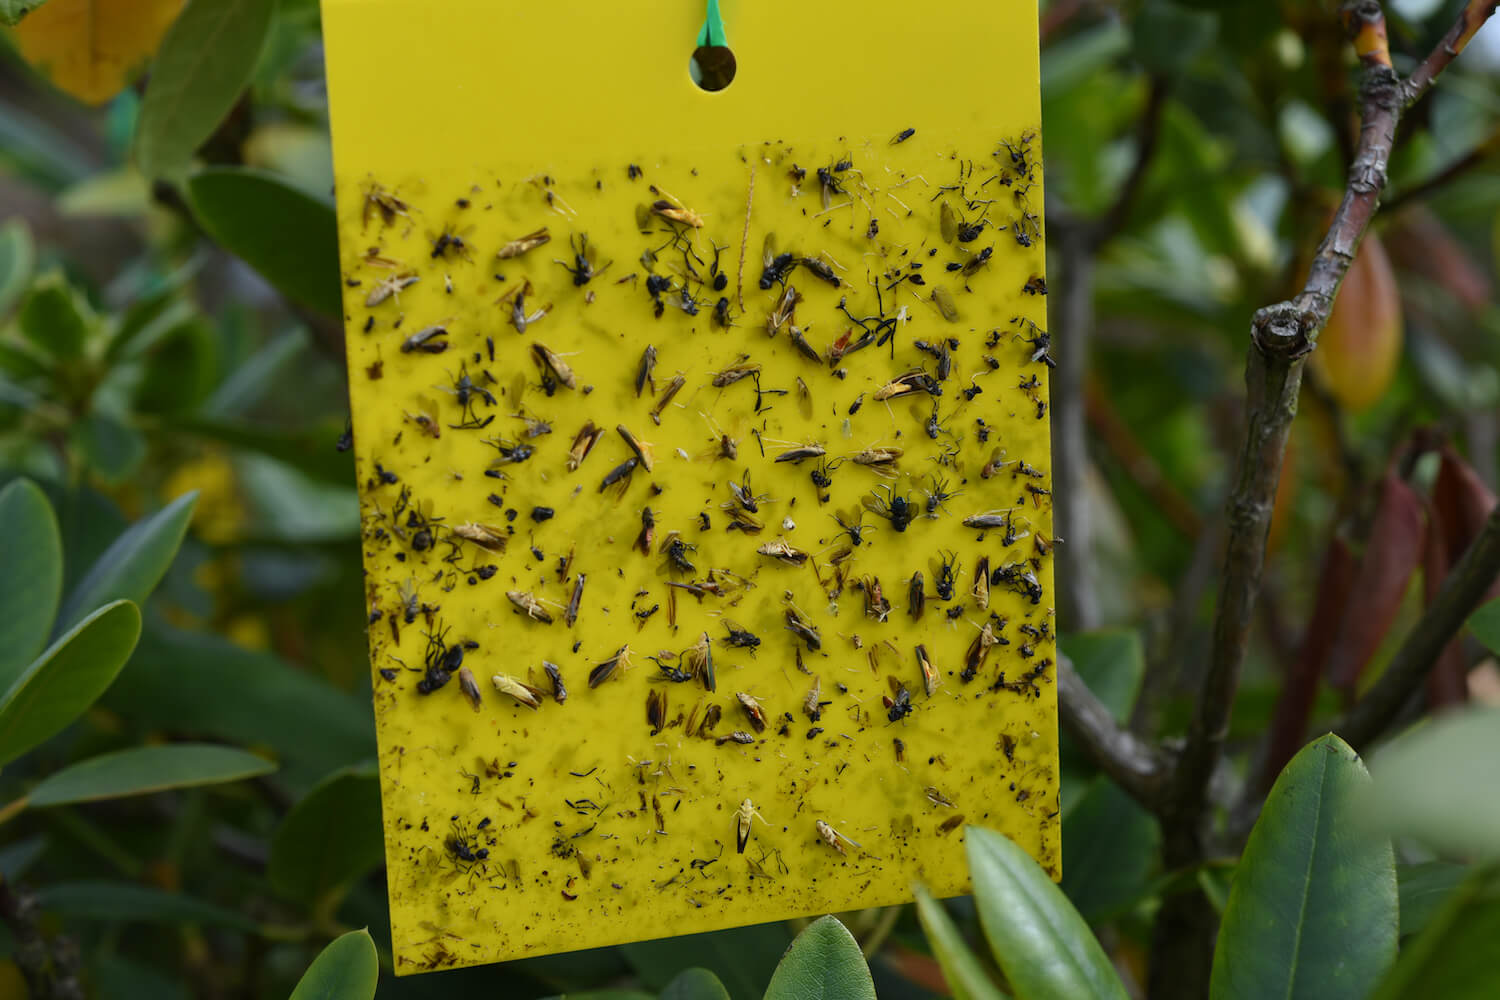 What are sticky bug traps? How effective are sticky bug traps?